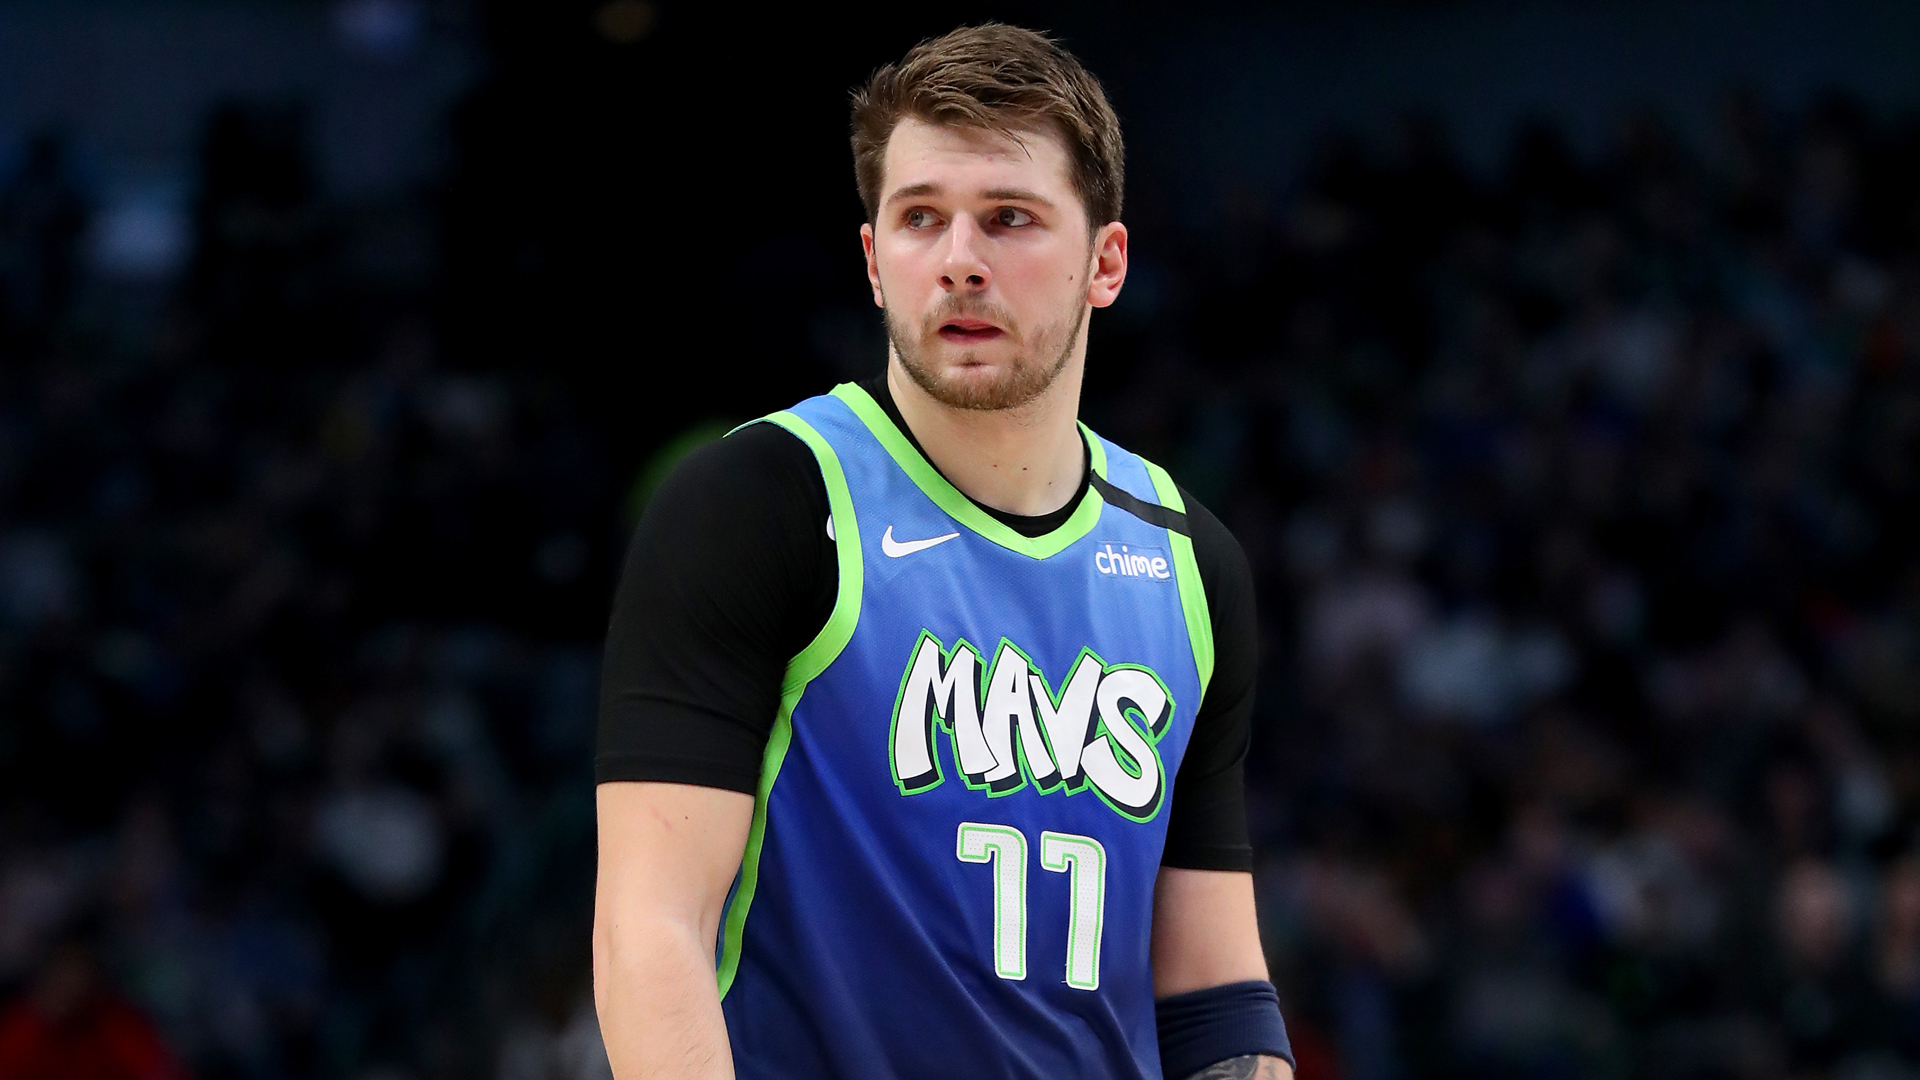 Luka Doncic scored 29 points and collected 11 rebounds to help the Dallas Mavericks beat the Oklahoma City Thunder on Monday.